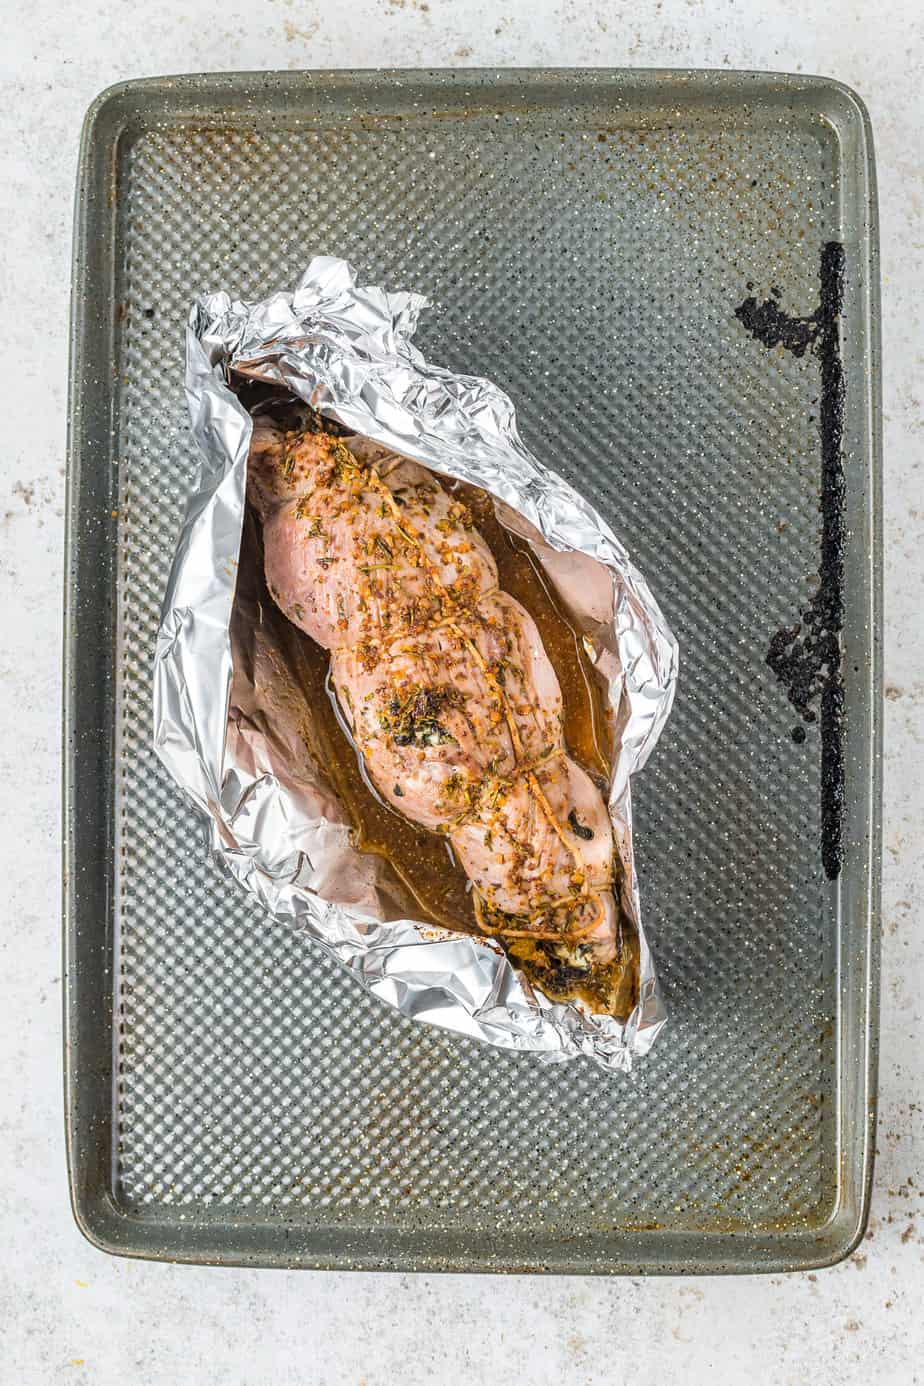 Stuffed and rolled pork tenderloin sits in a piece of foil rolled up on the sides to contain the glaze on top of a baking sheet after cooking.